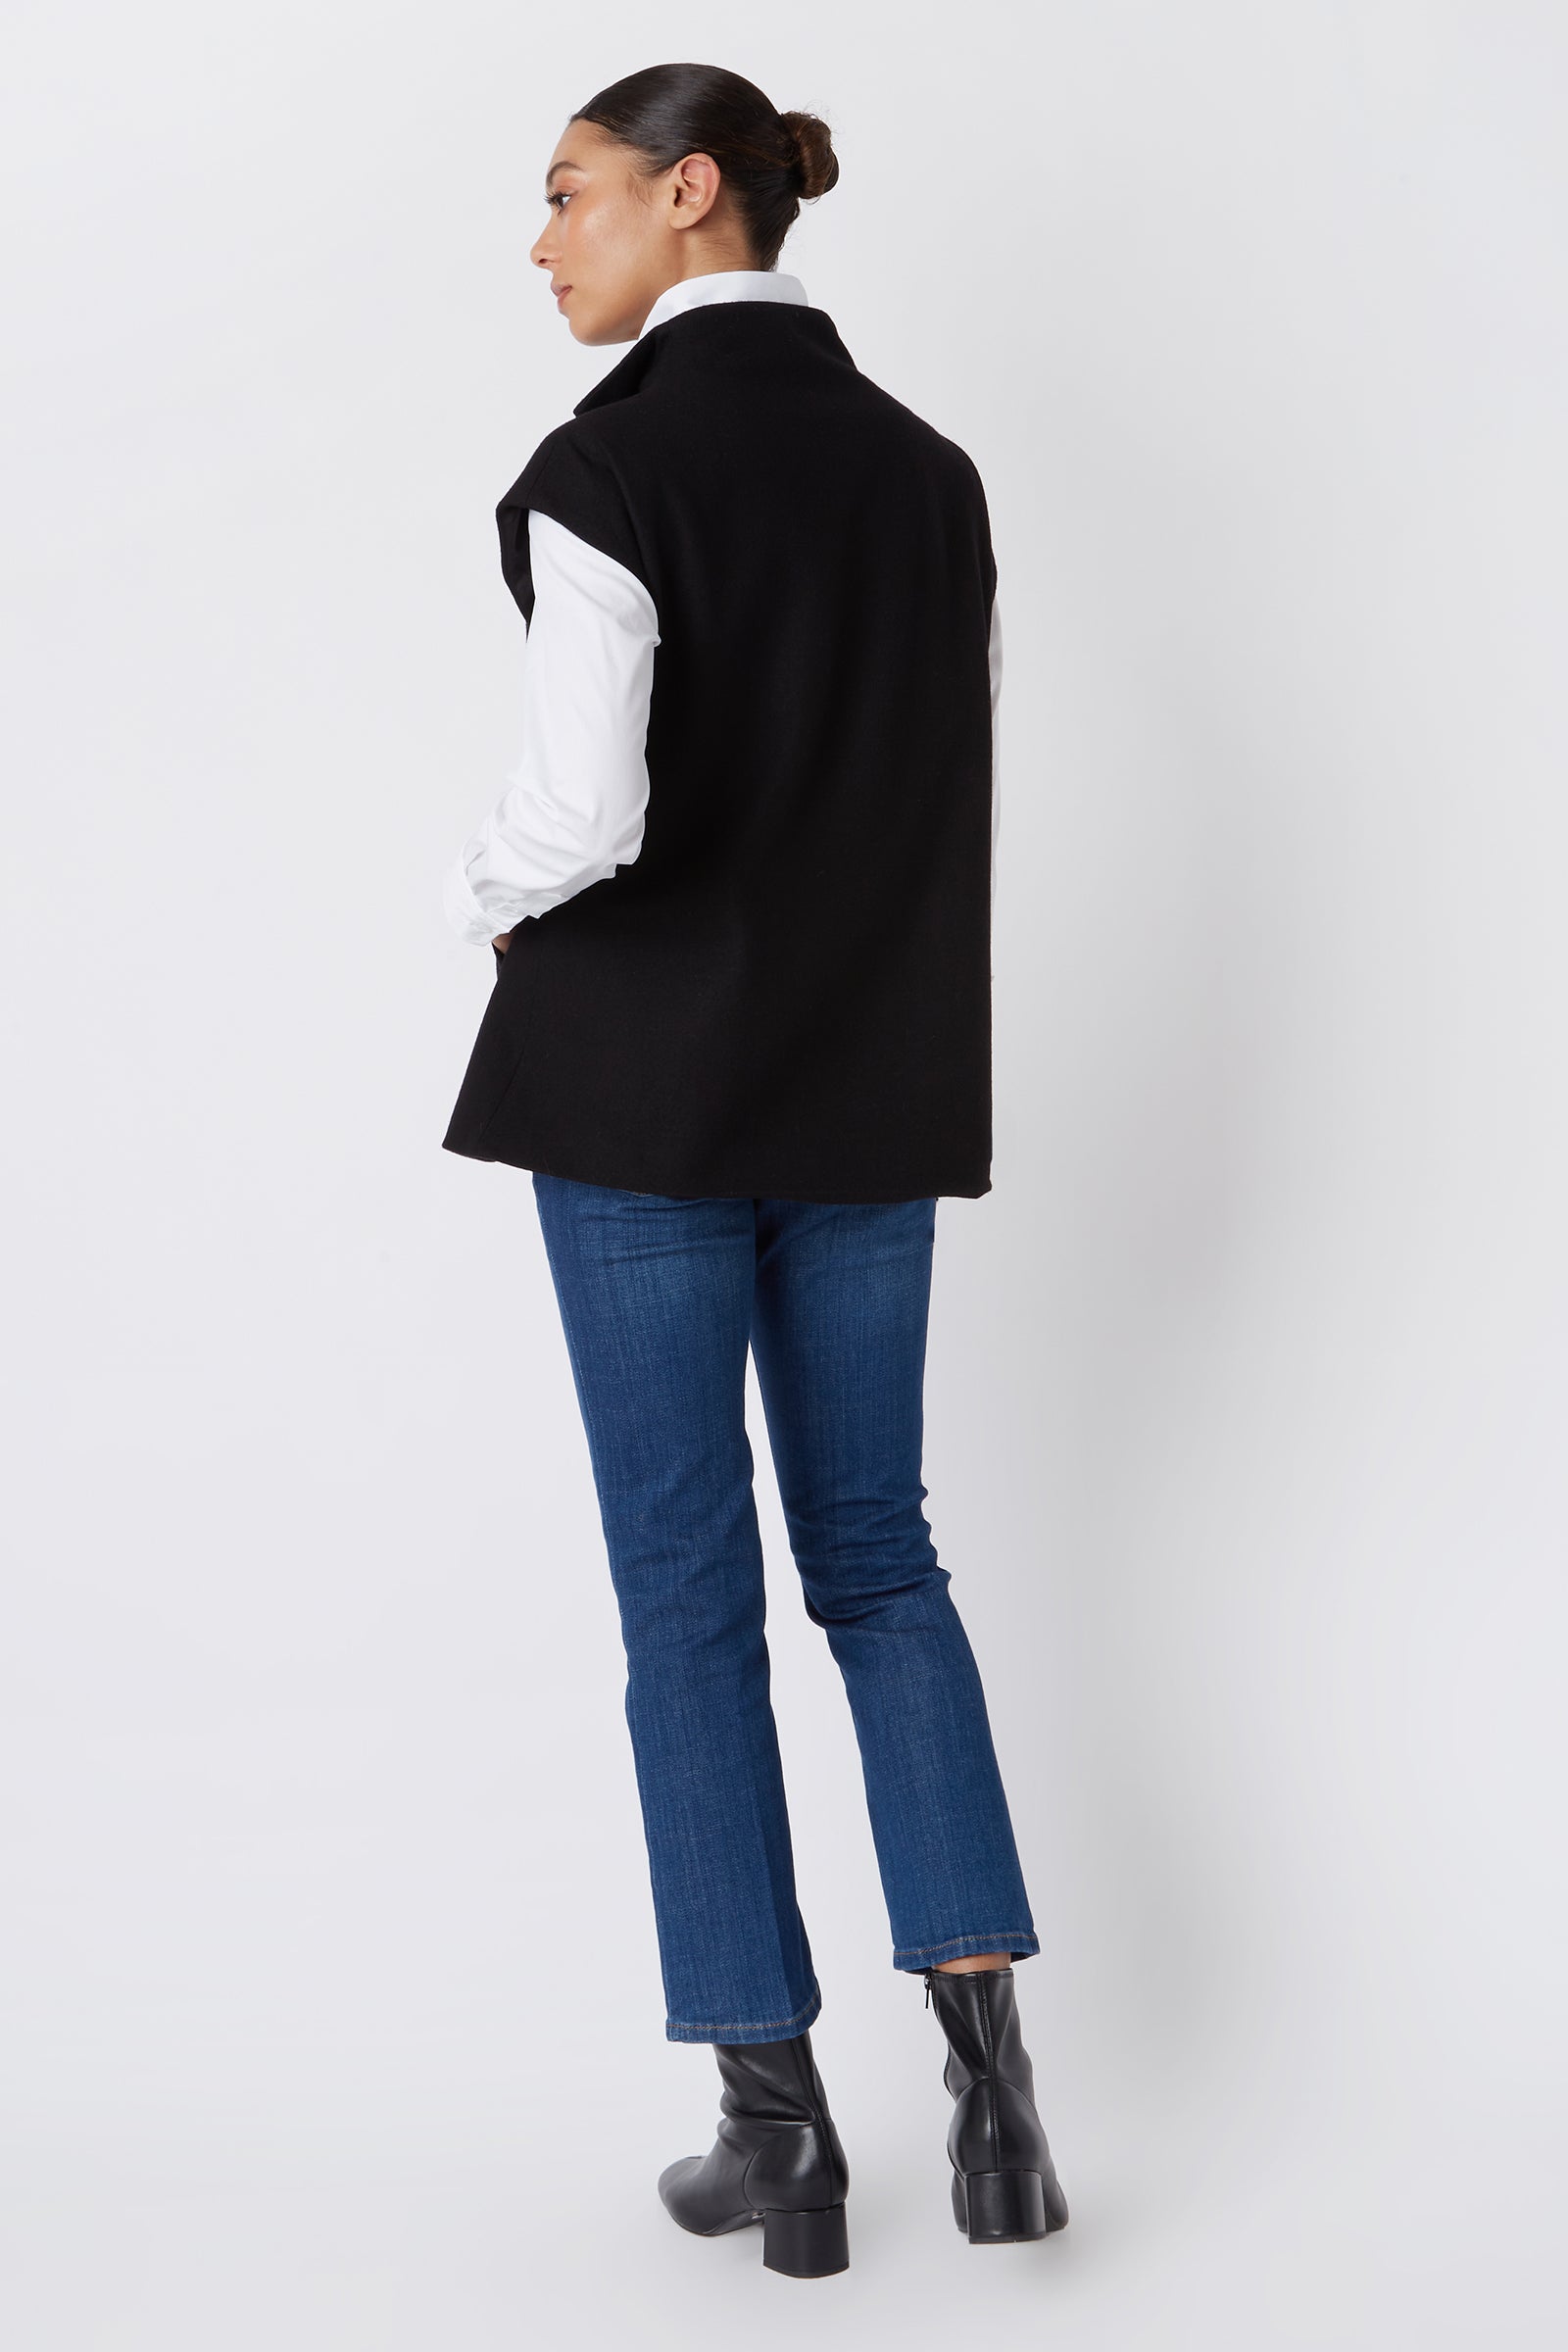 Kal Rieman Anne Collared Zip Vest in Black Felted Jersey on Model Main Full Front View